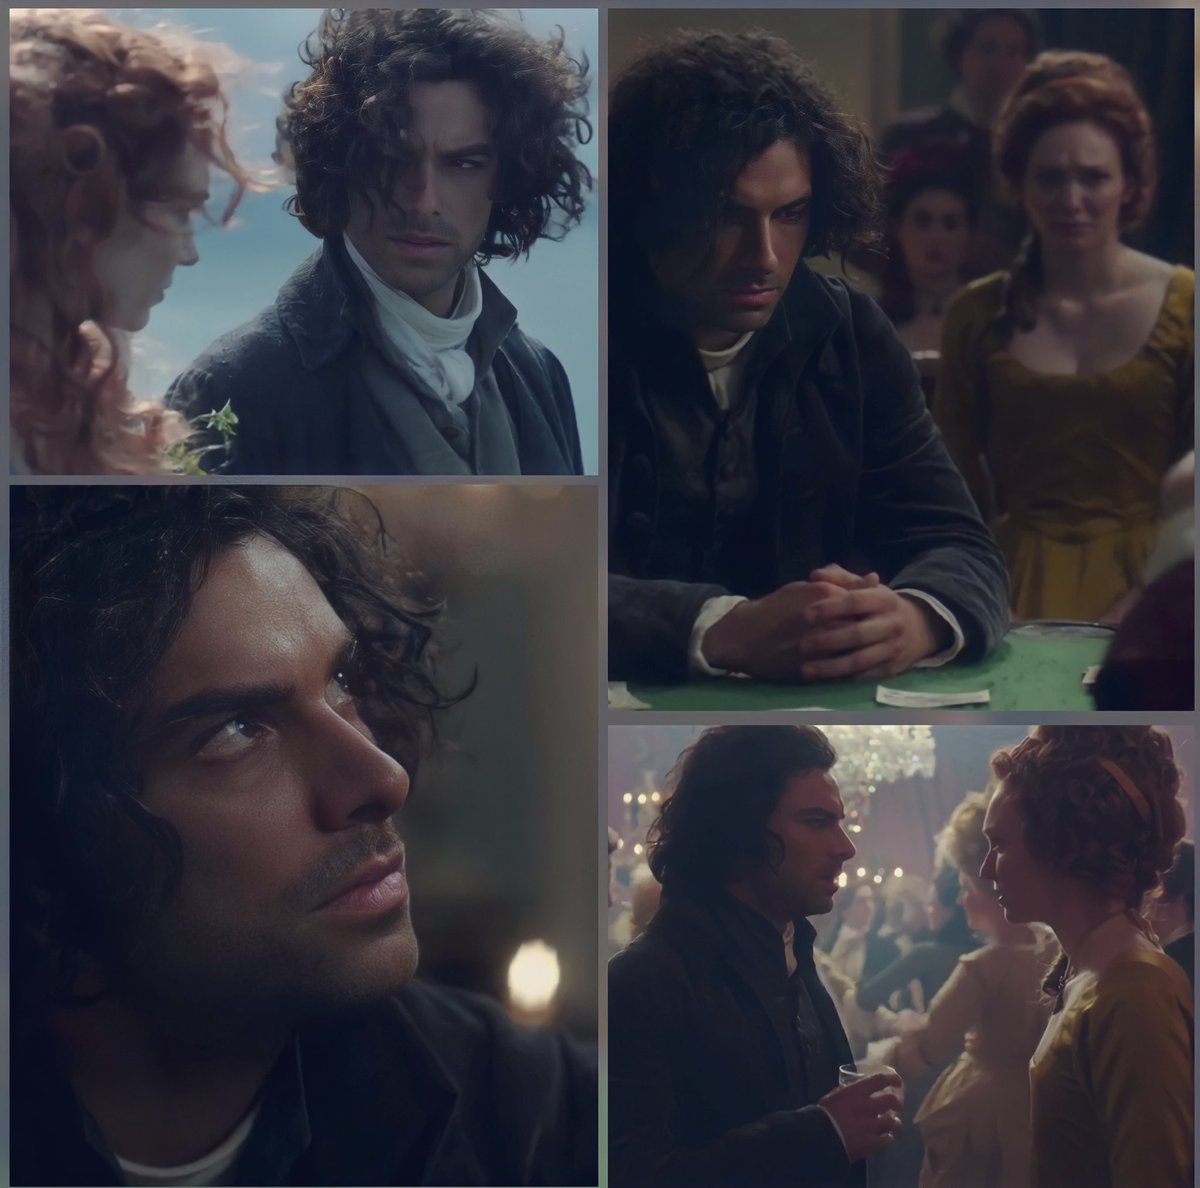 #TricornTuesday #Poldark #TurnerTomlinsonTuesday#RossandDemelza #Demelza has learnt a new word, propinquity,much to Ross’s amusement #Jim’s funeral & the First Ball..she wont go to another if he behaves like this again1-0 to #Demelza.🥰😍 #AidanTurner #EleanorTomlinson #AidanCrew